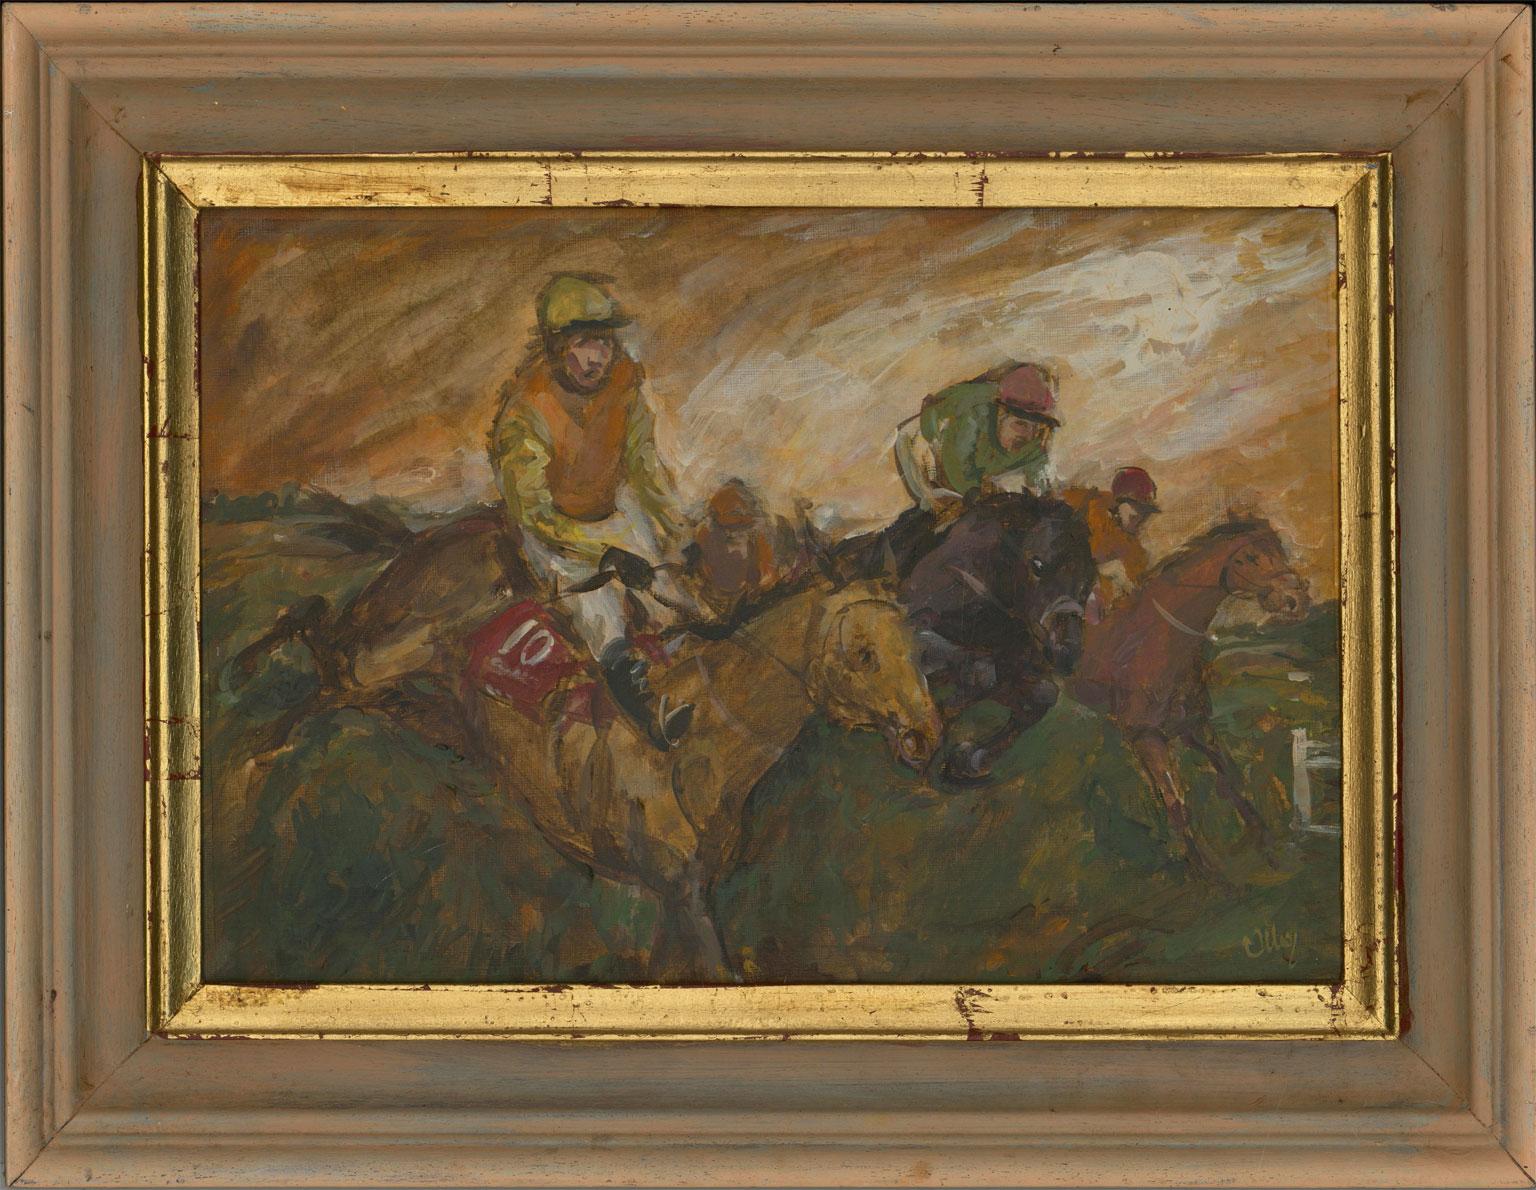 A well executed painting of a horse racing scene by the listed artist Ronald Olley. The picture depicts a group of jockeys passing the . The quick and distinct brushstrokes convey a real sense of speed, movement and action. The painting has been